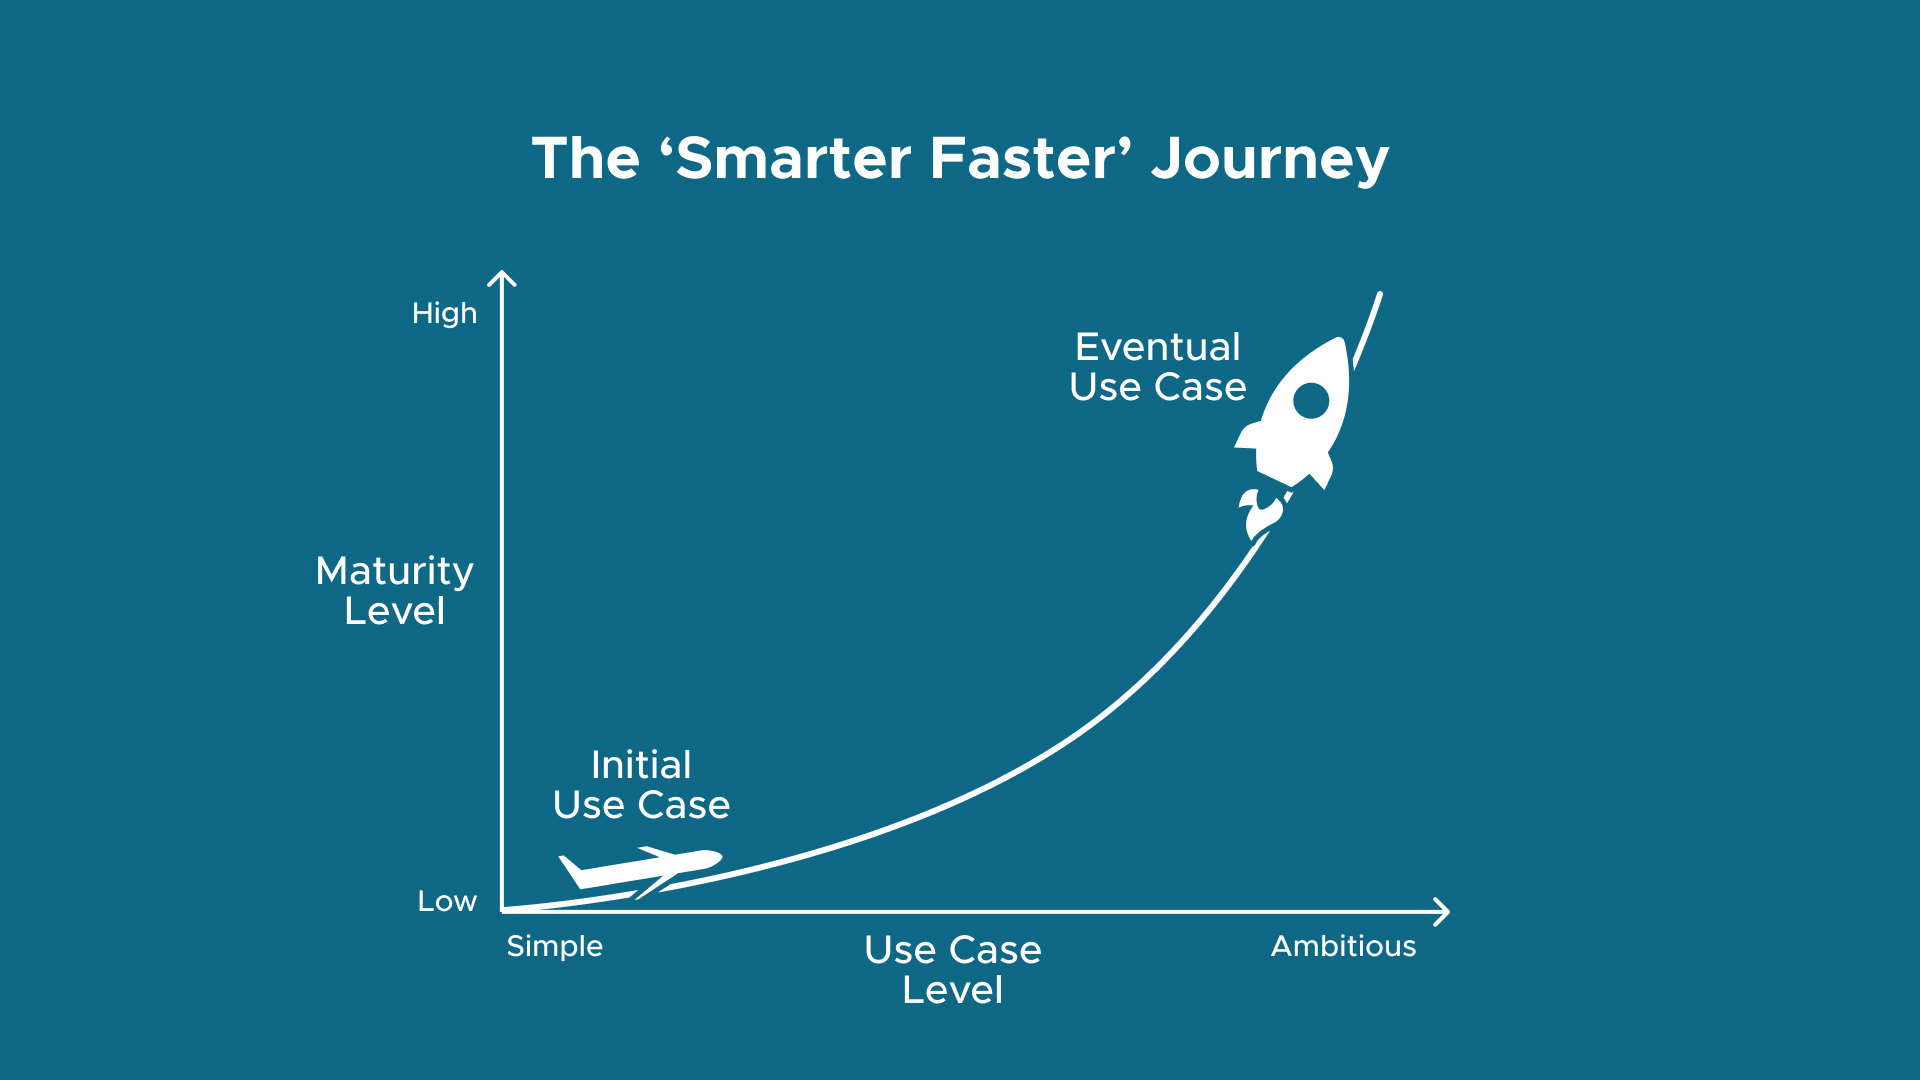 The smarter faster journey